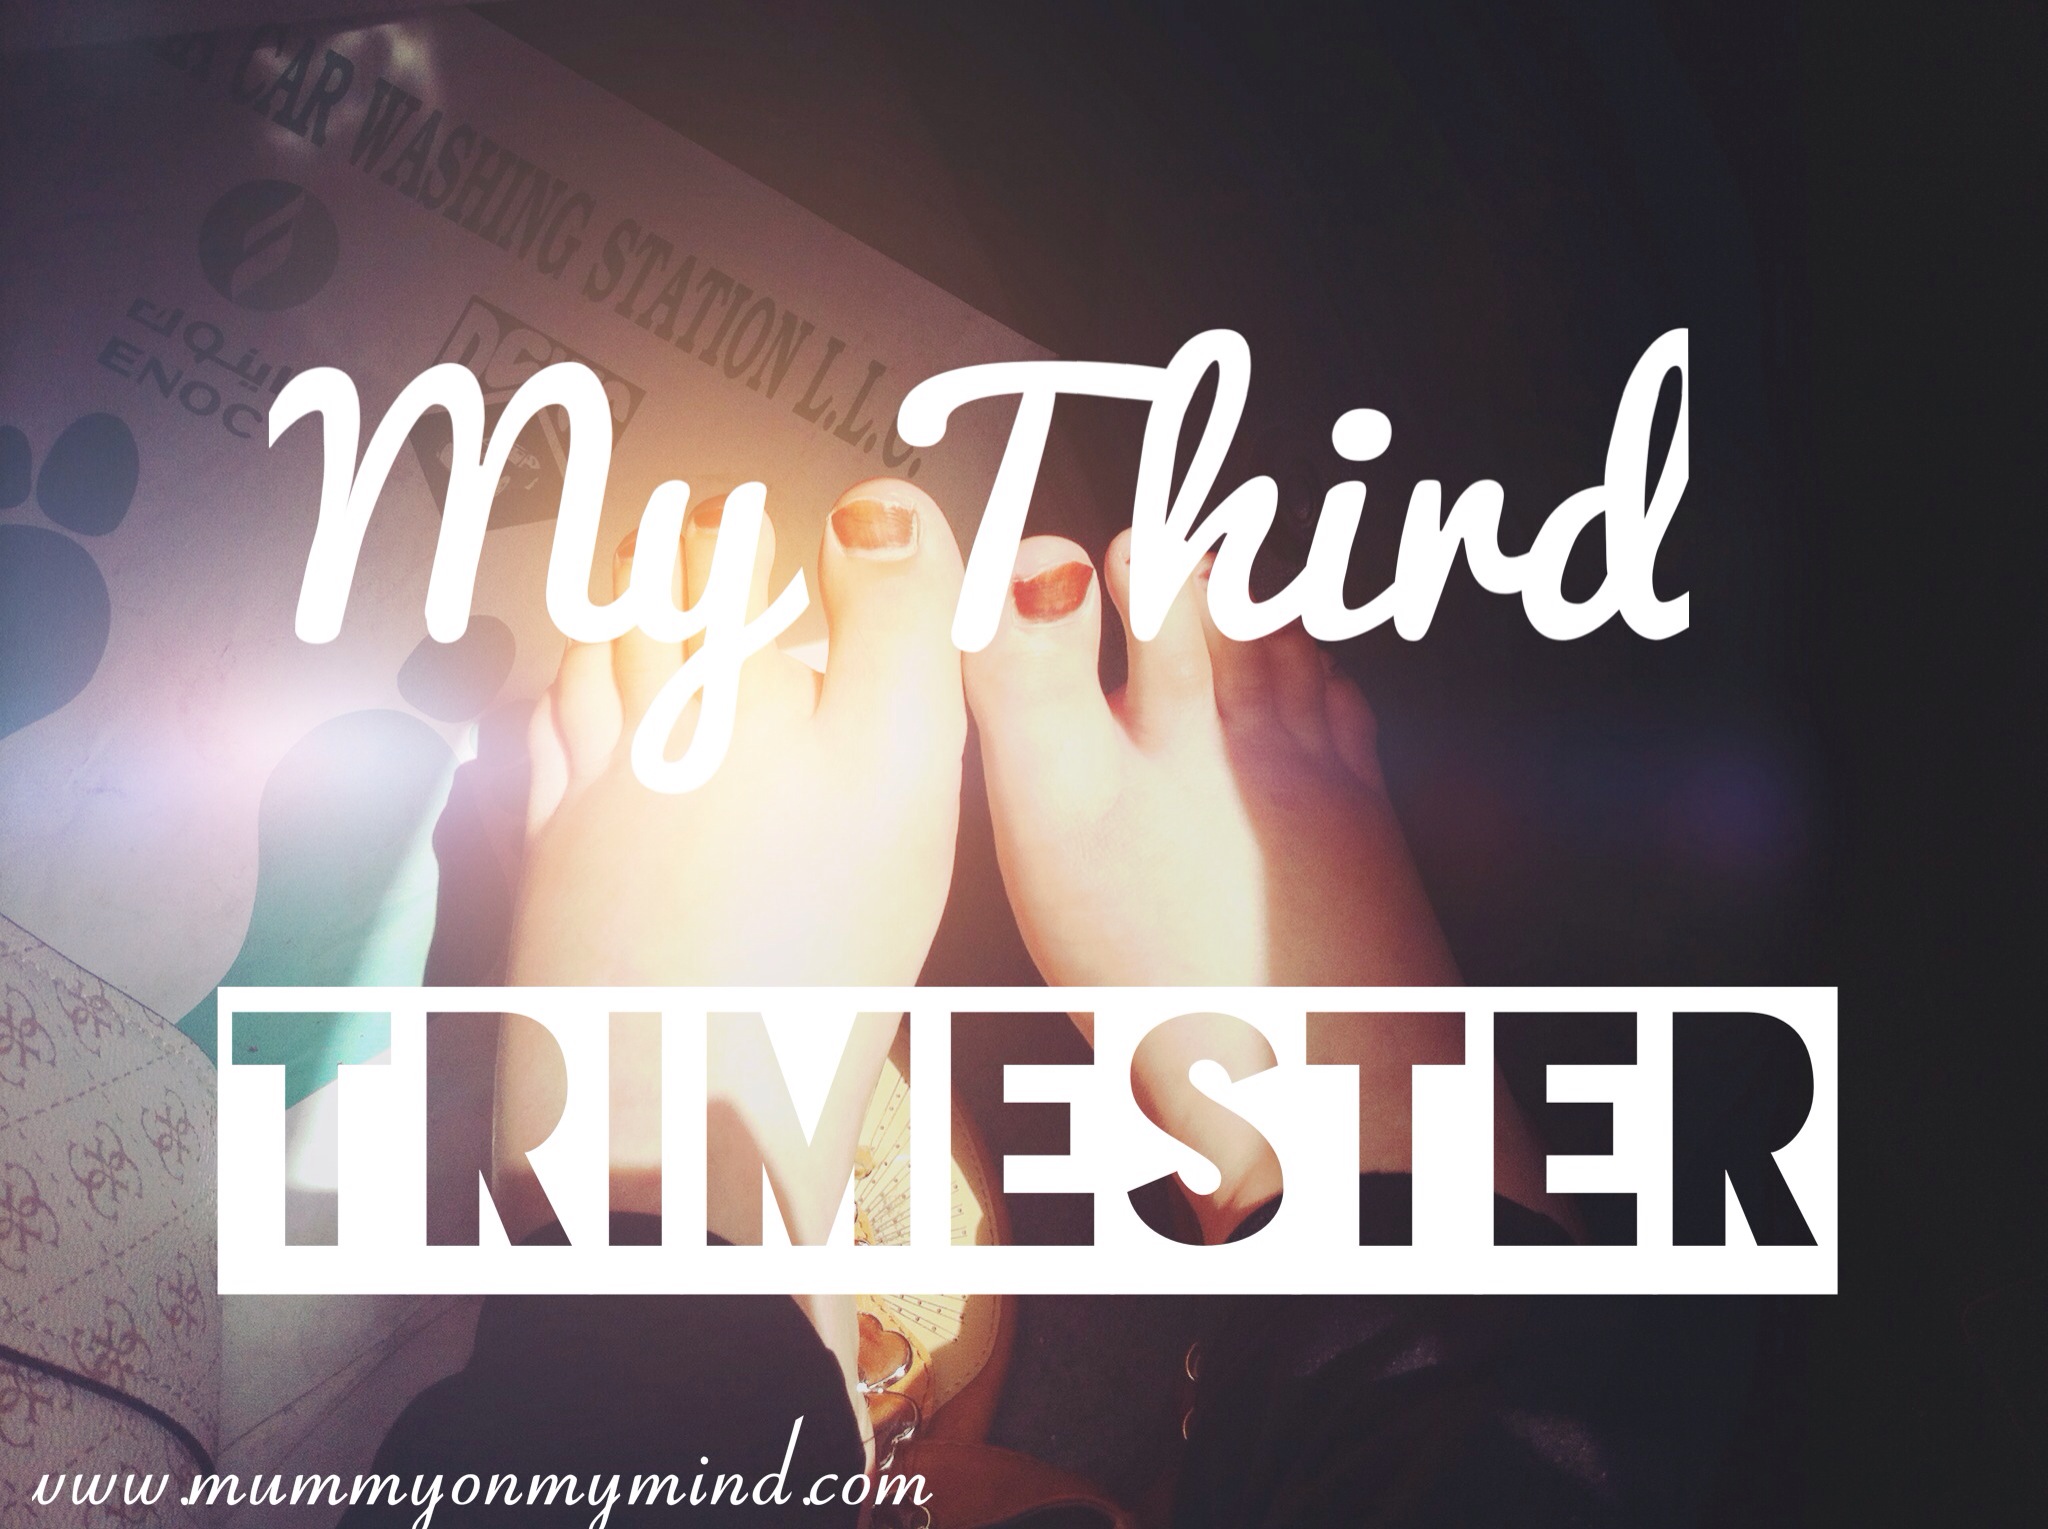 The Third Trimester…